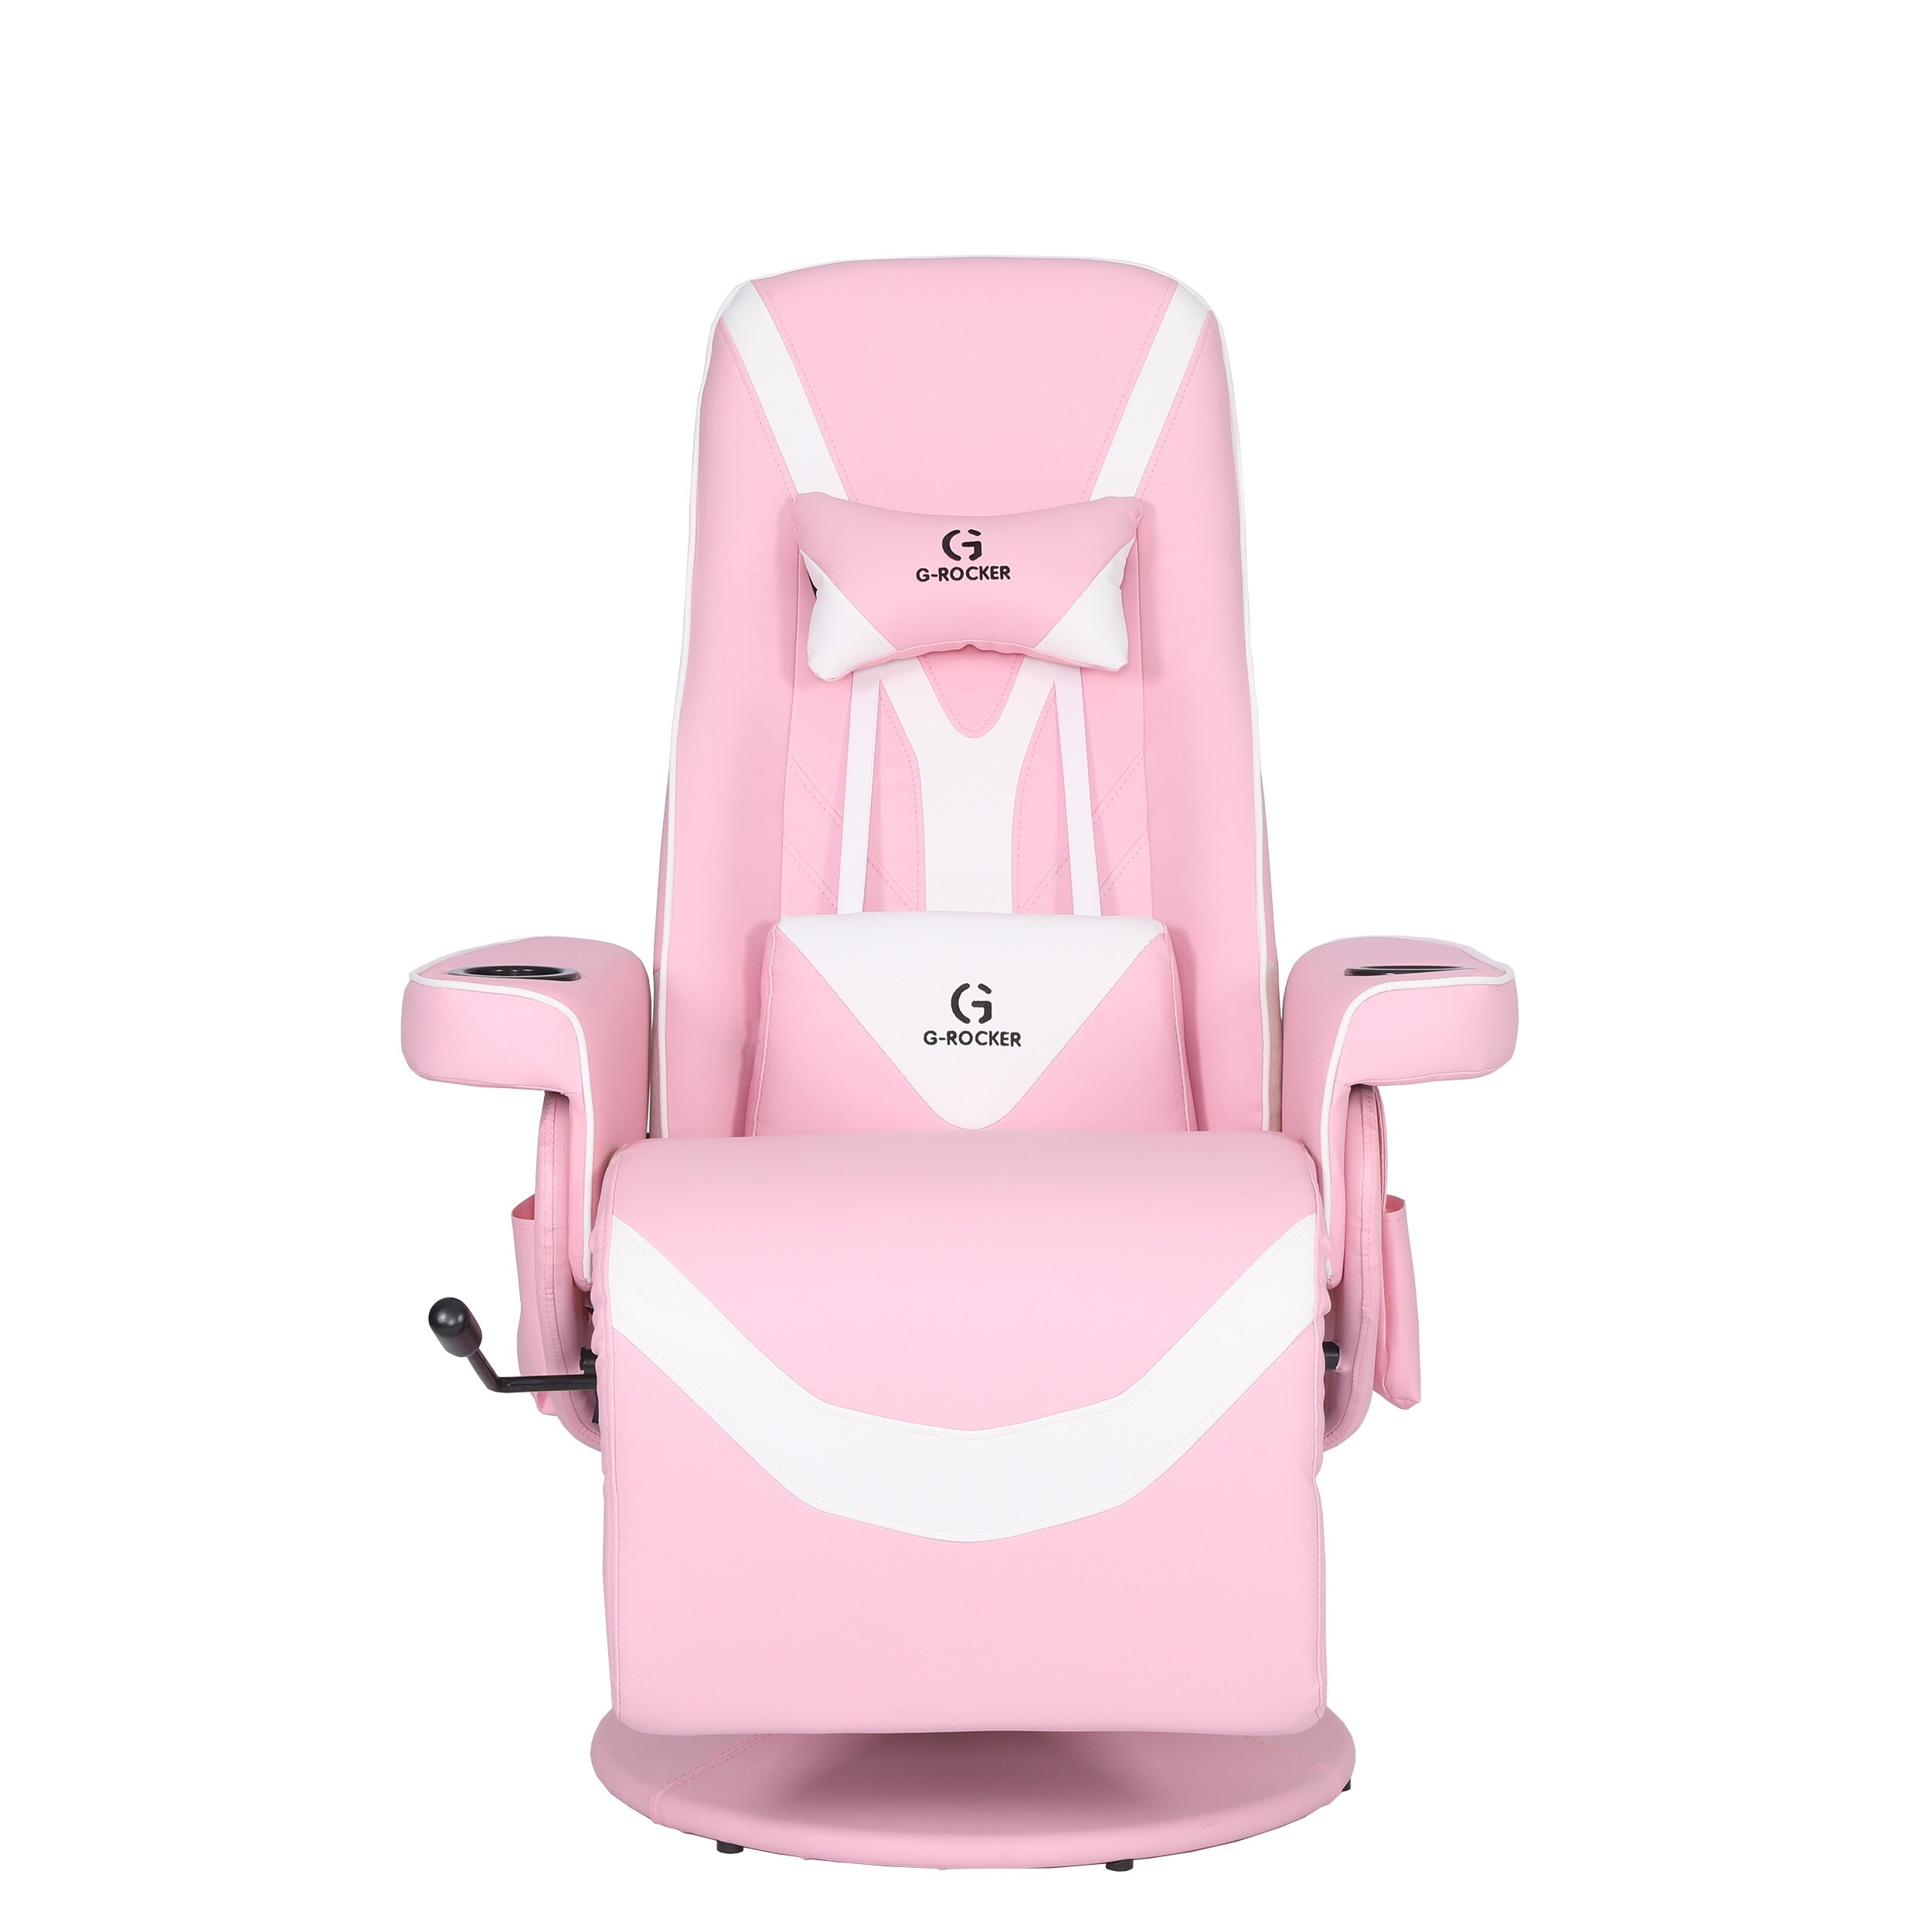 https://ak1.ostkcdn.com/images/products/is/images/direct/75fe58b98322b9535e14b86e35c6b37c094336bd/GZMR-Queen-Throne-Video-Gaming-Recliner-Chair.jpg